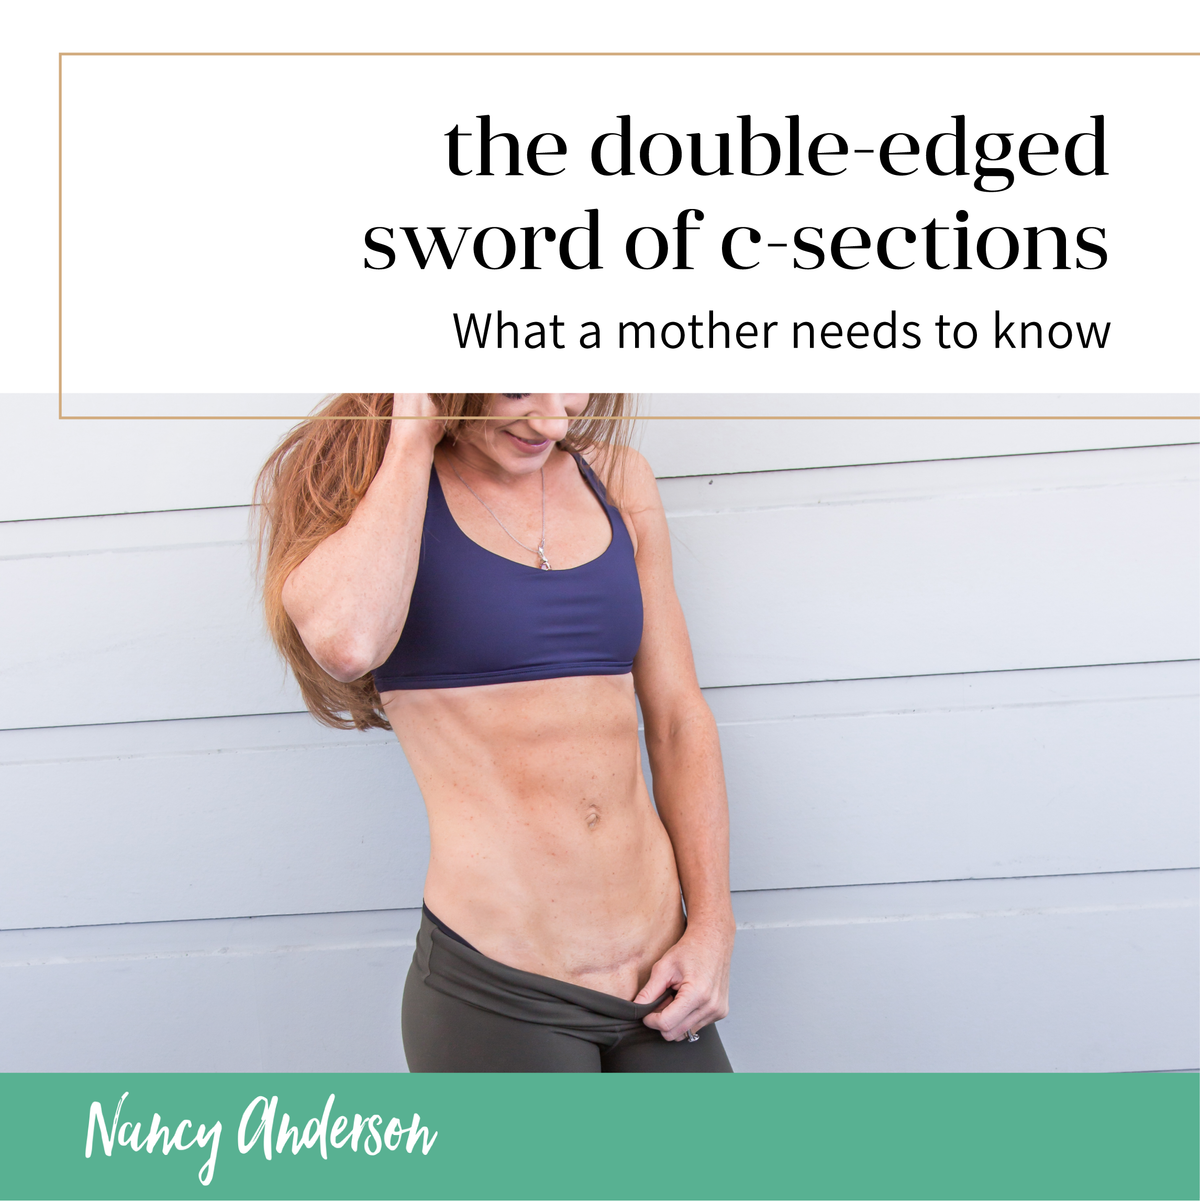 The Double-Edged Sword of C-Sections: What a Mother Needs to Know